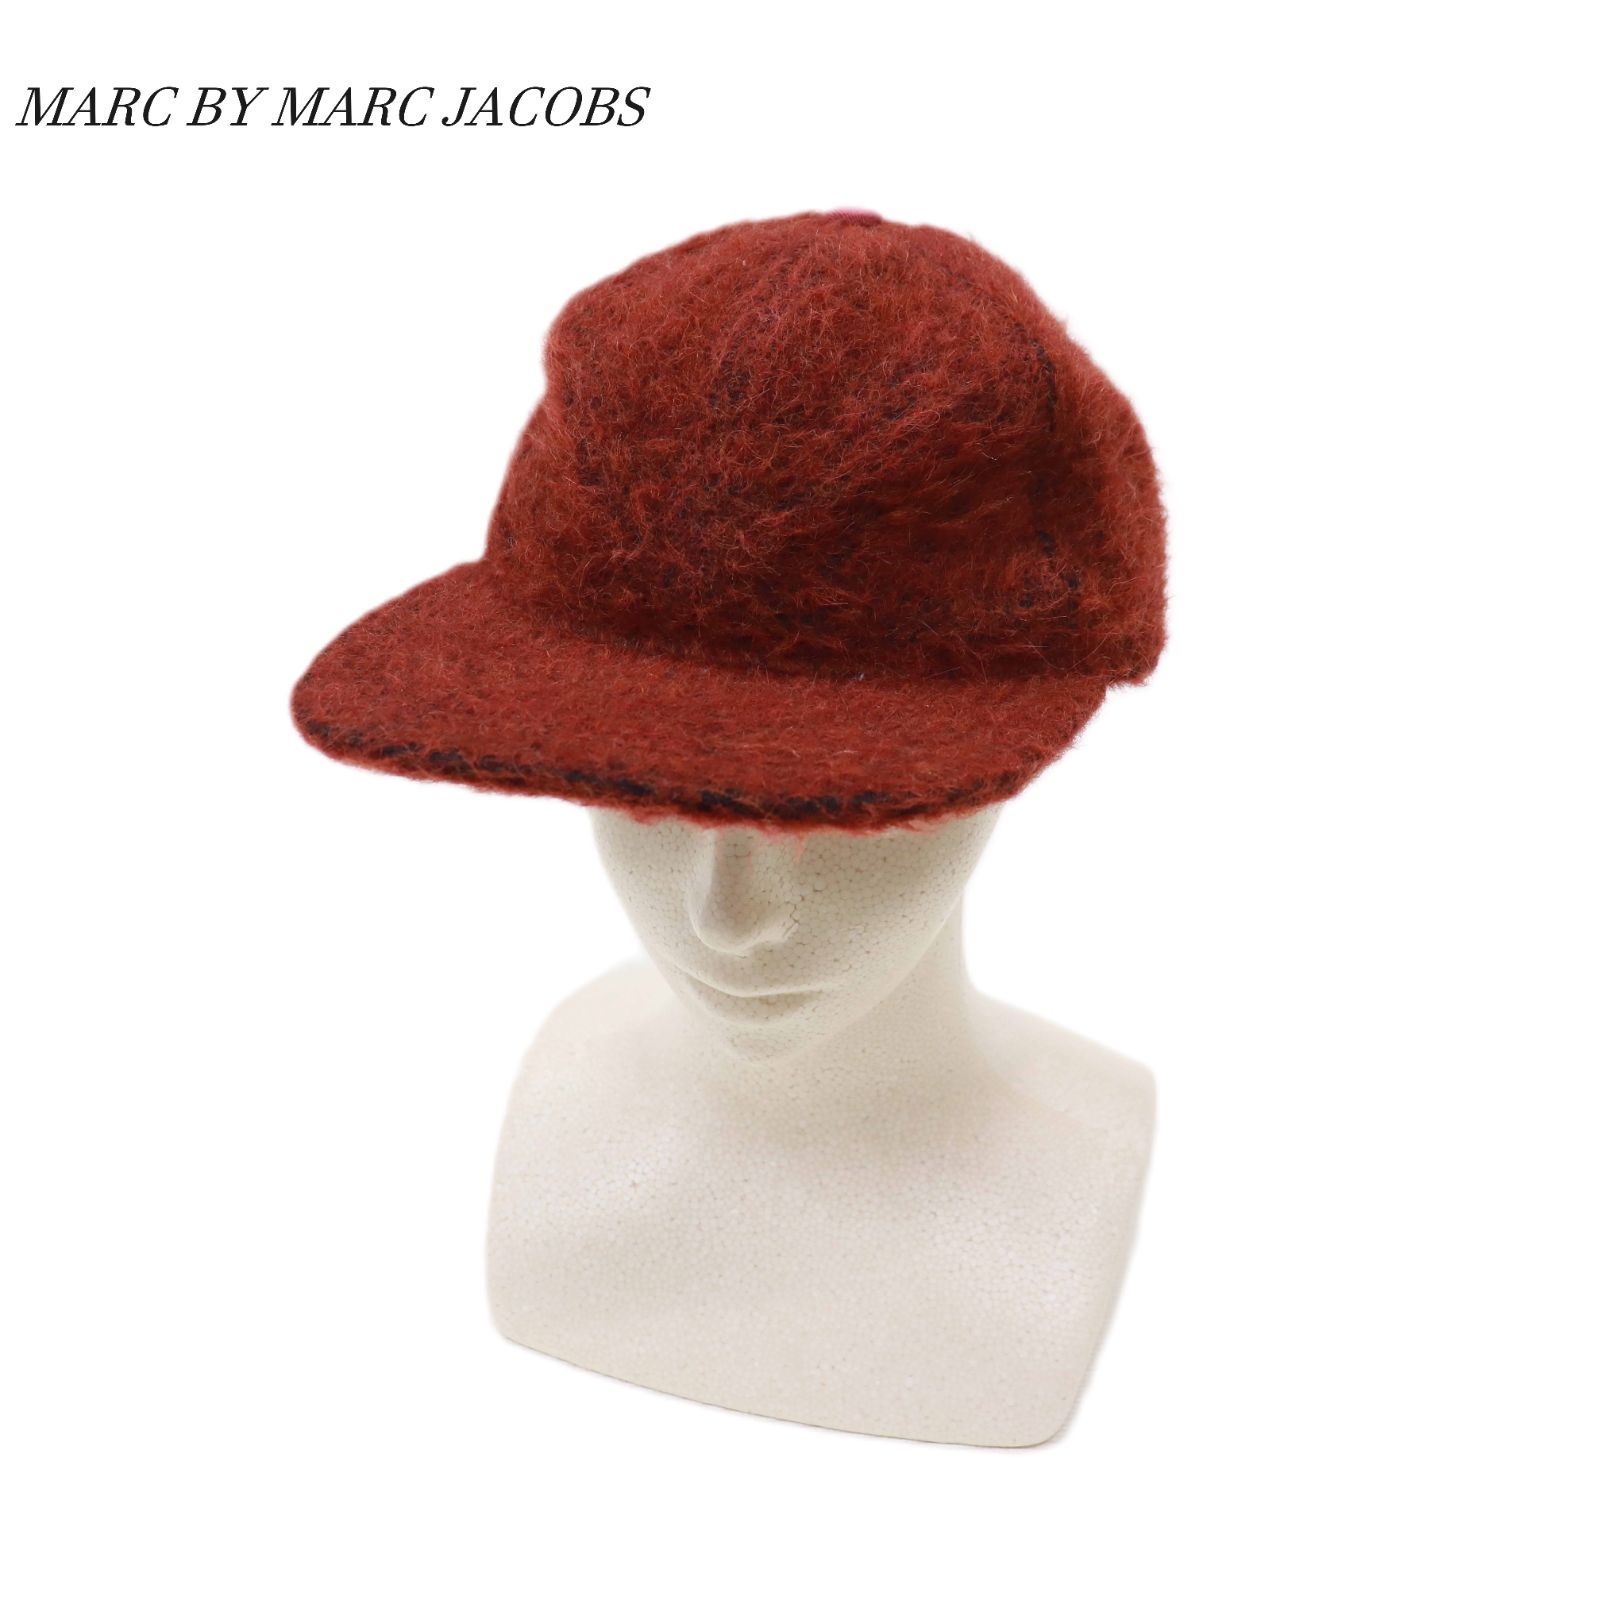 MARC BY MARC JACOBS マークバイマークジェイコブス 帽子 キャップ RED